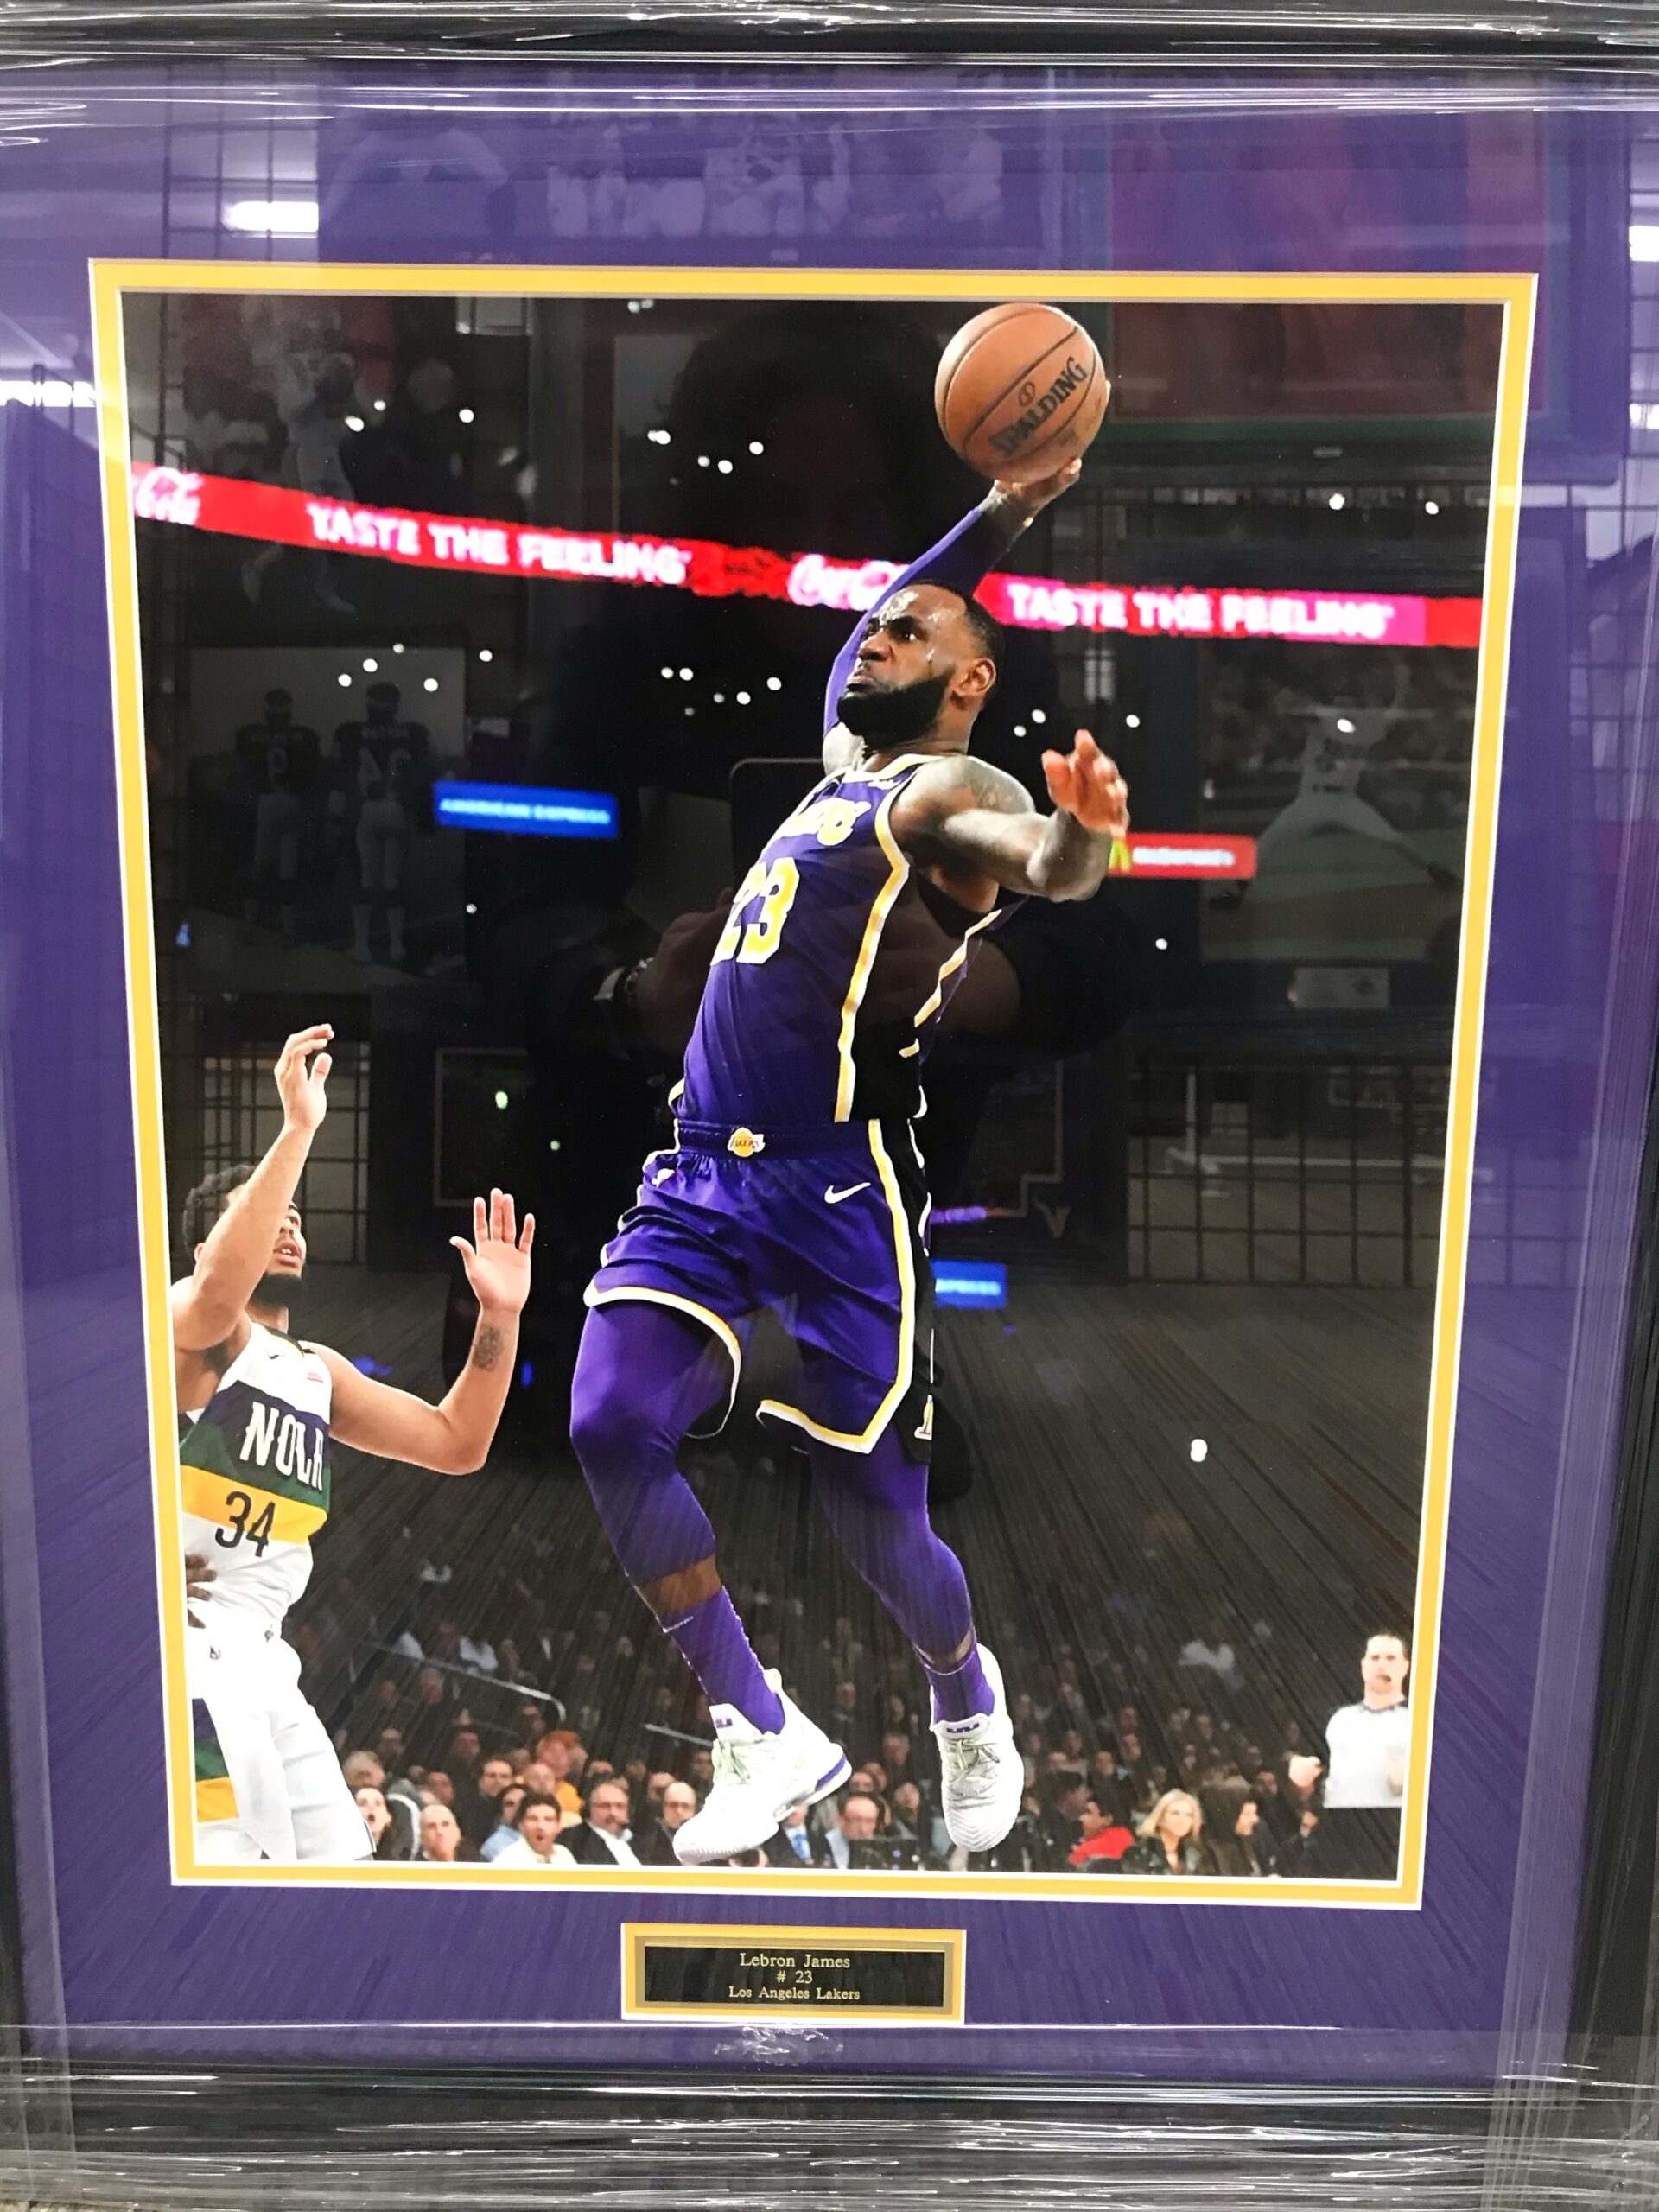 LeBron James' Los Angeles Lakers Signed and Framed Jersey